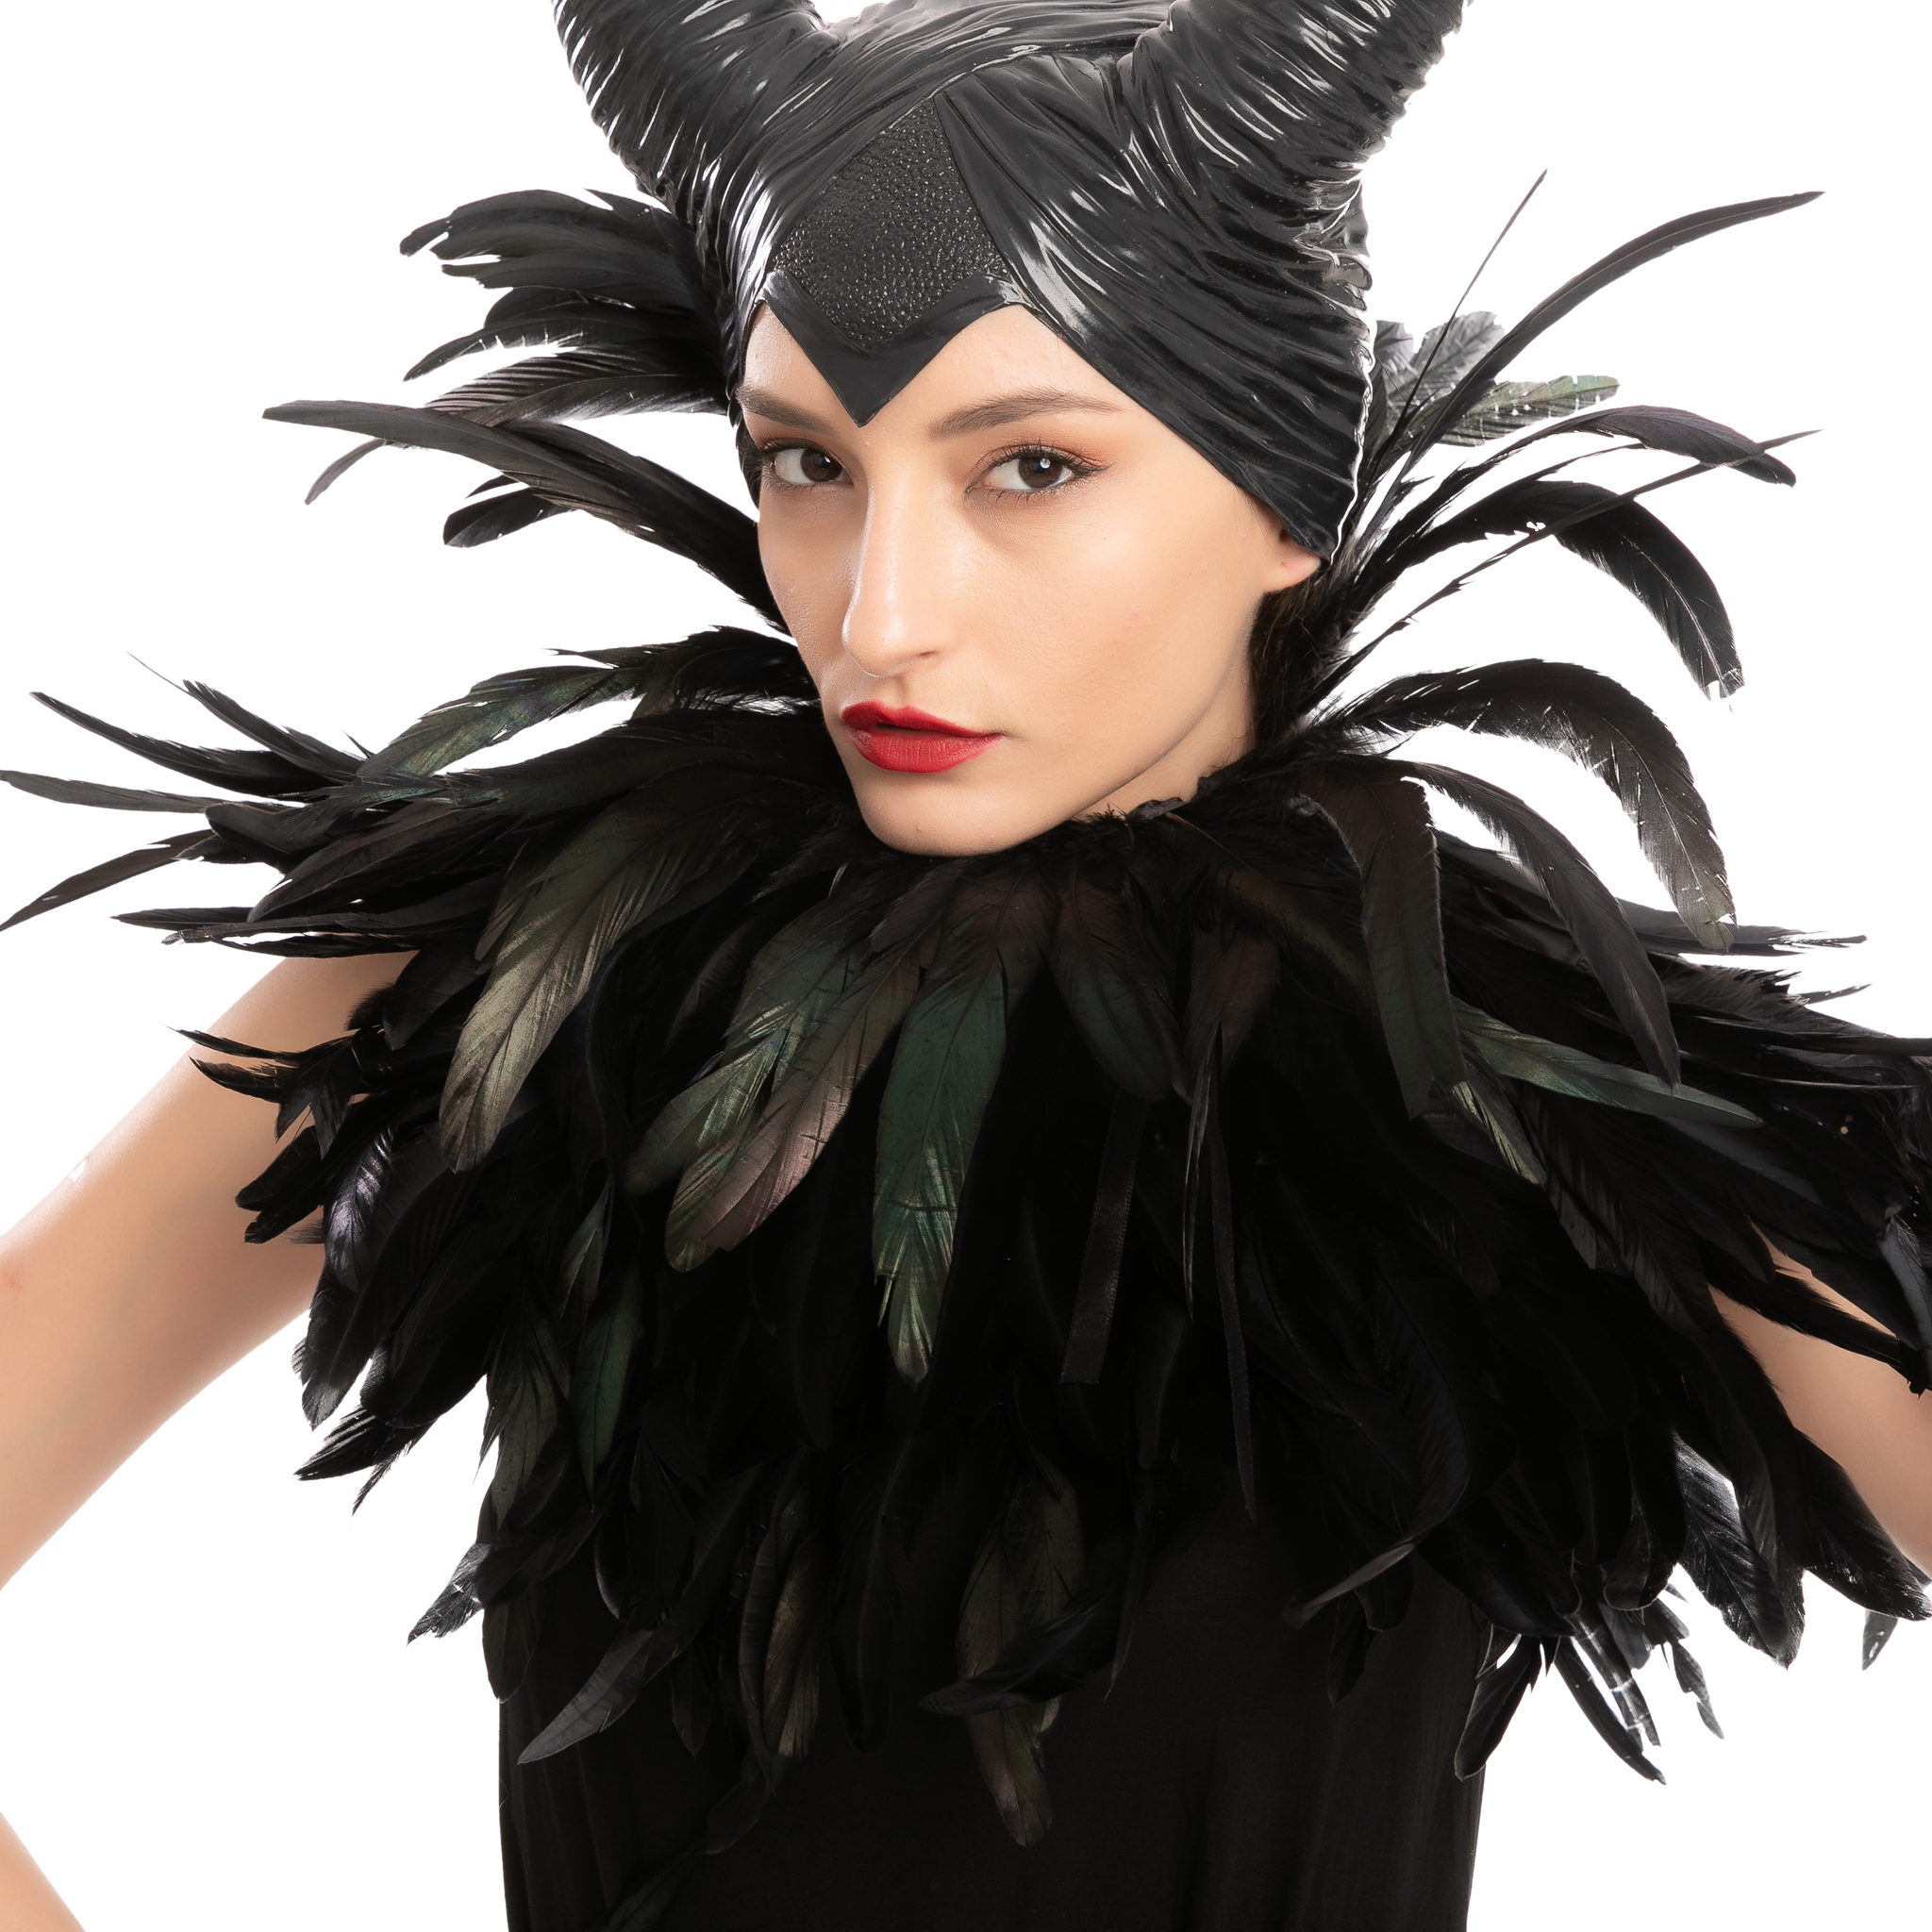 Black Queen Cosplay Accessories with Horn, Shawl, & Cuff